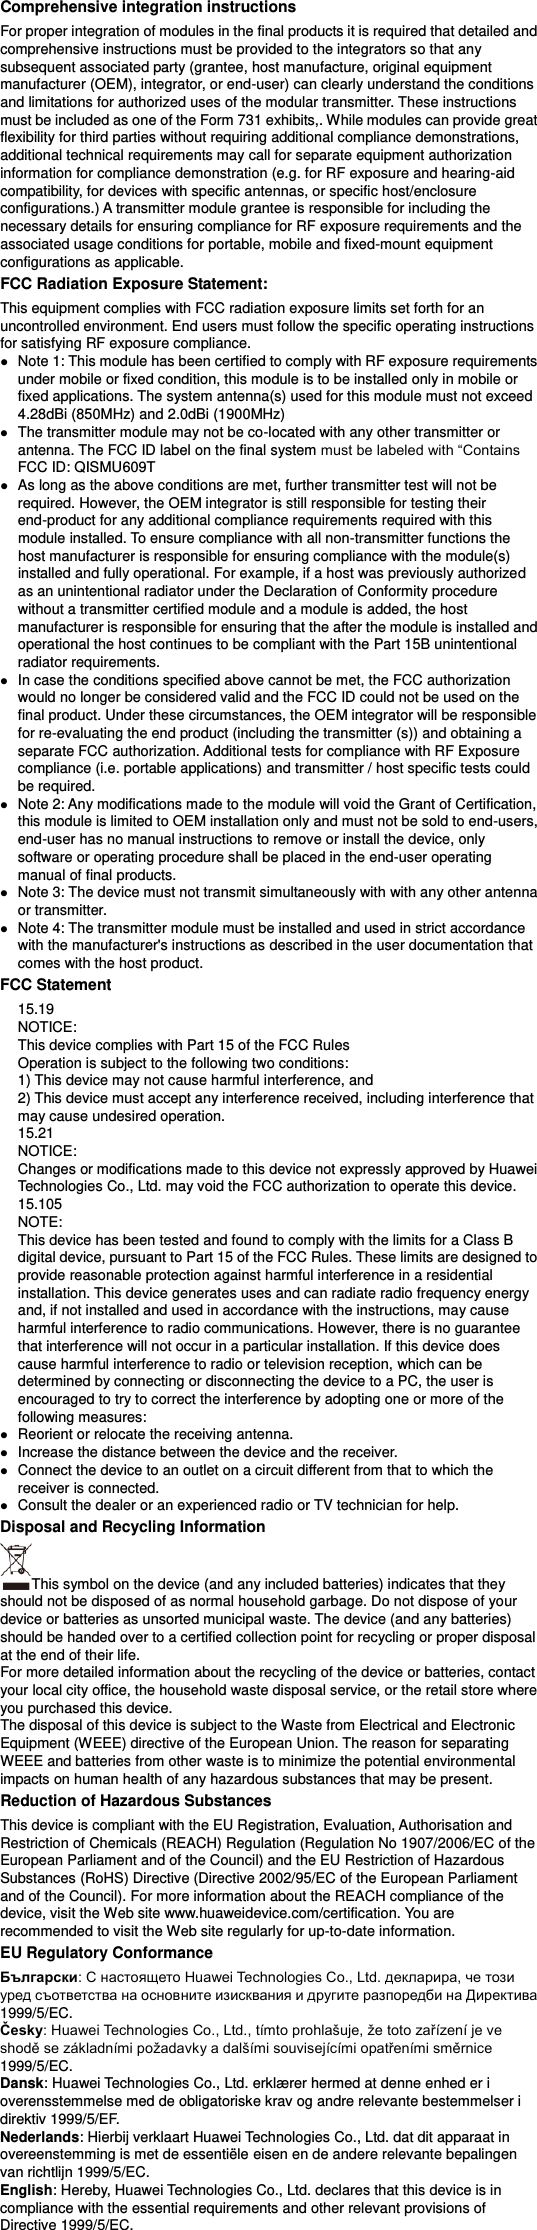 Comprehensive integration instructions   For proper integration of modules in the final products it is required that detailed and comprehensive instructions must be provided to the integrators so that any subsequent associated party (grantee, host manufacture, original equipment manufacturer (OEM), integrator, or end-user) can clearly understand the conditions and limitations for authorized uses of the modular transmitter. These instructions must be included as one of the Form 731 exhibits,. While modules can provide great flexibility for third parties without requiring additional compliance demonstrations, additional technical requirements may call for separate equipment authorization information for compliance demonstration (e.g. for RF exposure and hearing-aid compatibility, for devices with specific antennas, or specific host/enclosure configurations.) A transmitter module grantee is responsible for including the necessary details for ensuring compliance for RF exposure requirements and the associated usage conditions for portable, mobile and fixed-mount equipment configurations as applicable.   FCC Radiation Exposure Statement: This equipment complies with FCC radiation exposure limits set forth for an uncontrolled environment. End users must follow the specific operating instructions for satisfying RF exposure compliance.  Note 1: This module has been certified to comply with RF exposure requirements under mobile or fixed condition, this module is to be installed only in mobile or fixed applications. The system antenna(s) used for this module must not exceed 4.28dBi (850MHz) and 2.0dBi (1900MHz)  The transmitter module may not be co-located with any other transmitter or antenna. The FCC ID label on the final system FCC ID: QISMU609T  As long as the above conditions are met, further transmitter test will not be required. However, the OEM integrator is still responsible for testing their end-product for any additional compliance requirements required with this module installed. To ensure compliance with all non-transmitter functions the host manufacturer is responsible for ensuring compliance with the module(s) installed and fully operational. For example, if a host was previously authorized as an unintentional radiator under the Declaration of Conformity procedure without a transmitter certified module and a module is added, the host manufacturer is responsible for ensuring that the after the module is installed and operational the host continues to be compliant with the Part 15B unintentional radiator requirements.  In case the conditions specified above cannot be met, the FCC authorization would no longer be considered valid and the FCC ID could not be used on the final product. Under these circumstances, the OEM integrator will be responsible for re-evaluating the end product (including the transmitter (s)) and obtaining a separate FCC authorization. Additional tests for compliance with RF Exposure compliance (i.e. portable applications) and transmitter / host specific tests could be required.  Note 2: Any modifications made to the module will void the Grant of Certification, this module is limited to OEM installation only and must not be sold to end-users, end-user has no manual instructions to remove or install the device, only software or operating procedure shall be placed in the end-user operating manual of final products.  Note 3: The device must not transmit simultaneously with with any other antenna or transmitter.  Note 4: The transmitter module must be installed and used in strict accordance with the manufacturer&apos;s instructions as described in the user documentation that comes with the host product. FCC Statement   15.19   NOTICE:   This device complies with Part 15 of the FCC Rules   Operation is subject to the following two conditions:   1) This device may not cause harmful interference, and   2) This device must accept any interference received, including interference that may cause undesired operation.   15.21   NOTICE:   Changes or modifications made to this device not expressly approved by Huawei Technologies Co., Ltd. may void the FCC authorization to operate this device.   15.105   NOTE:   This device has been tested and found to comply with the limits for a Class B digital device, pursuant to Part 15 of the FCC Rules. These limits are designed to provide reasonable protection against harmful interference in a residential installation. This device generates uses and can radiate radio frequency energy and, if not installed and used in accordance with the instructions, may cause harmful interference to radio communications. However, there is no guarantee that interference will not occur in a particular installation. If this device does cause harmful interference to radio or television reception, which can be determined by connecting or disconnecting the device to a PC, the user is encouraged to try to correct the interference by adopting one or more of the following measures:    Reorient or relocate the receiving antenna.    Increase the distance between the device and the receiver.    Connect the device to an outlet on a circuit different from that to which the receiver is connected.    Consult the dealer or an experienced radio or TV technician for help. Disposal and Recycling Information This symbol on the device (and any included batteries) indicates that they should not be disposed of as normal household garbage. Do not dispose of your device or batteries as unsorted municipal waste. The device (and any batteries) should be handed over to a certified collection point for recycling or proper disposal at the end of their life.     For more detailed information about the recycling of the device or batteries, contact your local city office, the household waste disposal service, or the retail store where you purchased this device. The disposal of this device is subject to the Waste from Electrical and Electronic Equipment (WEEE) directive of the European Union. The reason for separating WEEE and batteries from other waste is to minimize the potential environmental impacts on human health of any hazardous substances that may be present. Reduction of Hazardous Substances This device is compliant with the EU Registration, Evaluation, Authorisation and Restriction of Chemicals (REACH) Regulation (Regulation No 1907/2006/EC of the European Parliament and of the Council) and the EU Restriction of Hazardous Substances (RoHS) Directive (Directive 2002/95/EC of the European Parliament and of the Council). For more information about the REACH compliance of the device, visit the Web site www.huaweidevice.com/certification. You are recommended to visit the Web site regularly for up-to-date information. EU Regulatory Conformance Български1999/5/EC. Česky1999/5/EC. Dansk: Huawei Technologies Co., Ltd. erklæ rer hermed at denne enhed er i overensstemmelse med de obligatoriske krav og andre relevante bestemmelser i direktiv 1999/5/EF. Nederlands: Hierbij verklaart Huawei Technologies Co., Ltd. dat dit apparaat in overeenstemming is met de essentiële eisen en de andere relevante bepalingen van richtlijn 1999/5/EC. English: Hereby, Huawei Technologies Co., Ltd. declares that this device is in compliance with the essential requirements and other relevant provisions of Directive 1999/5/EC. 